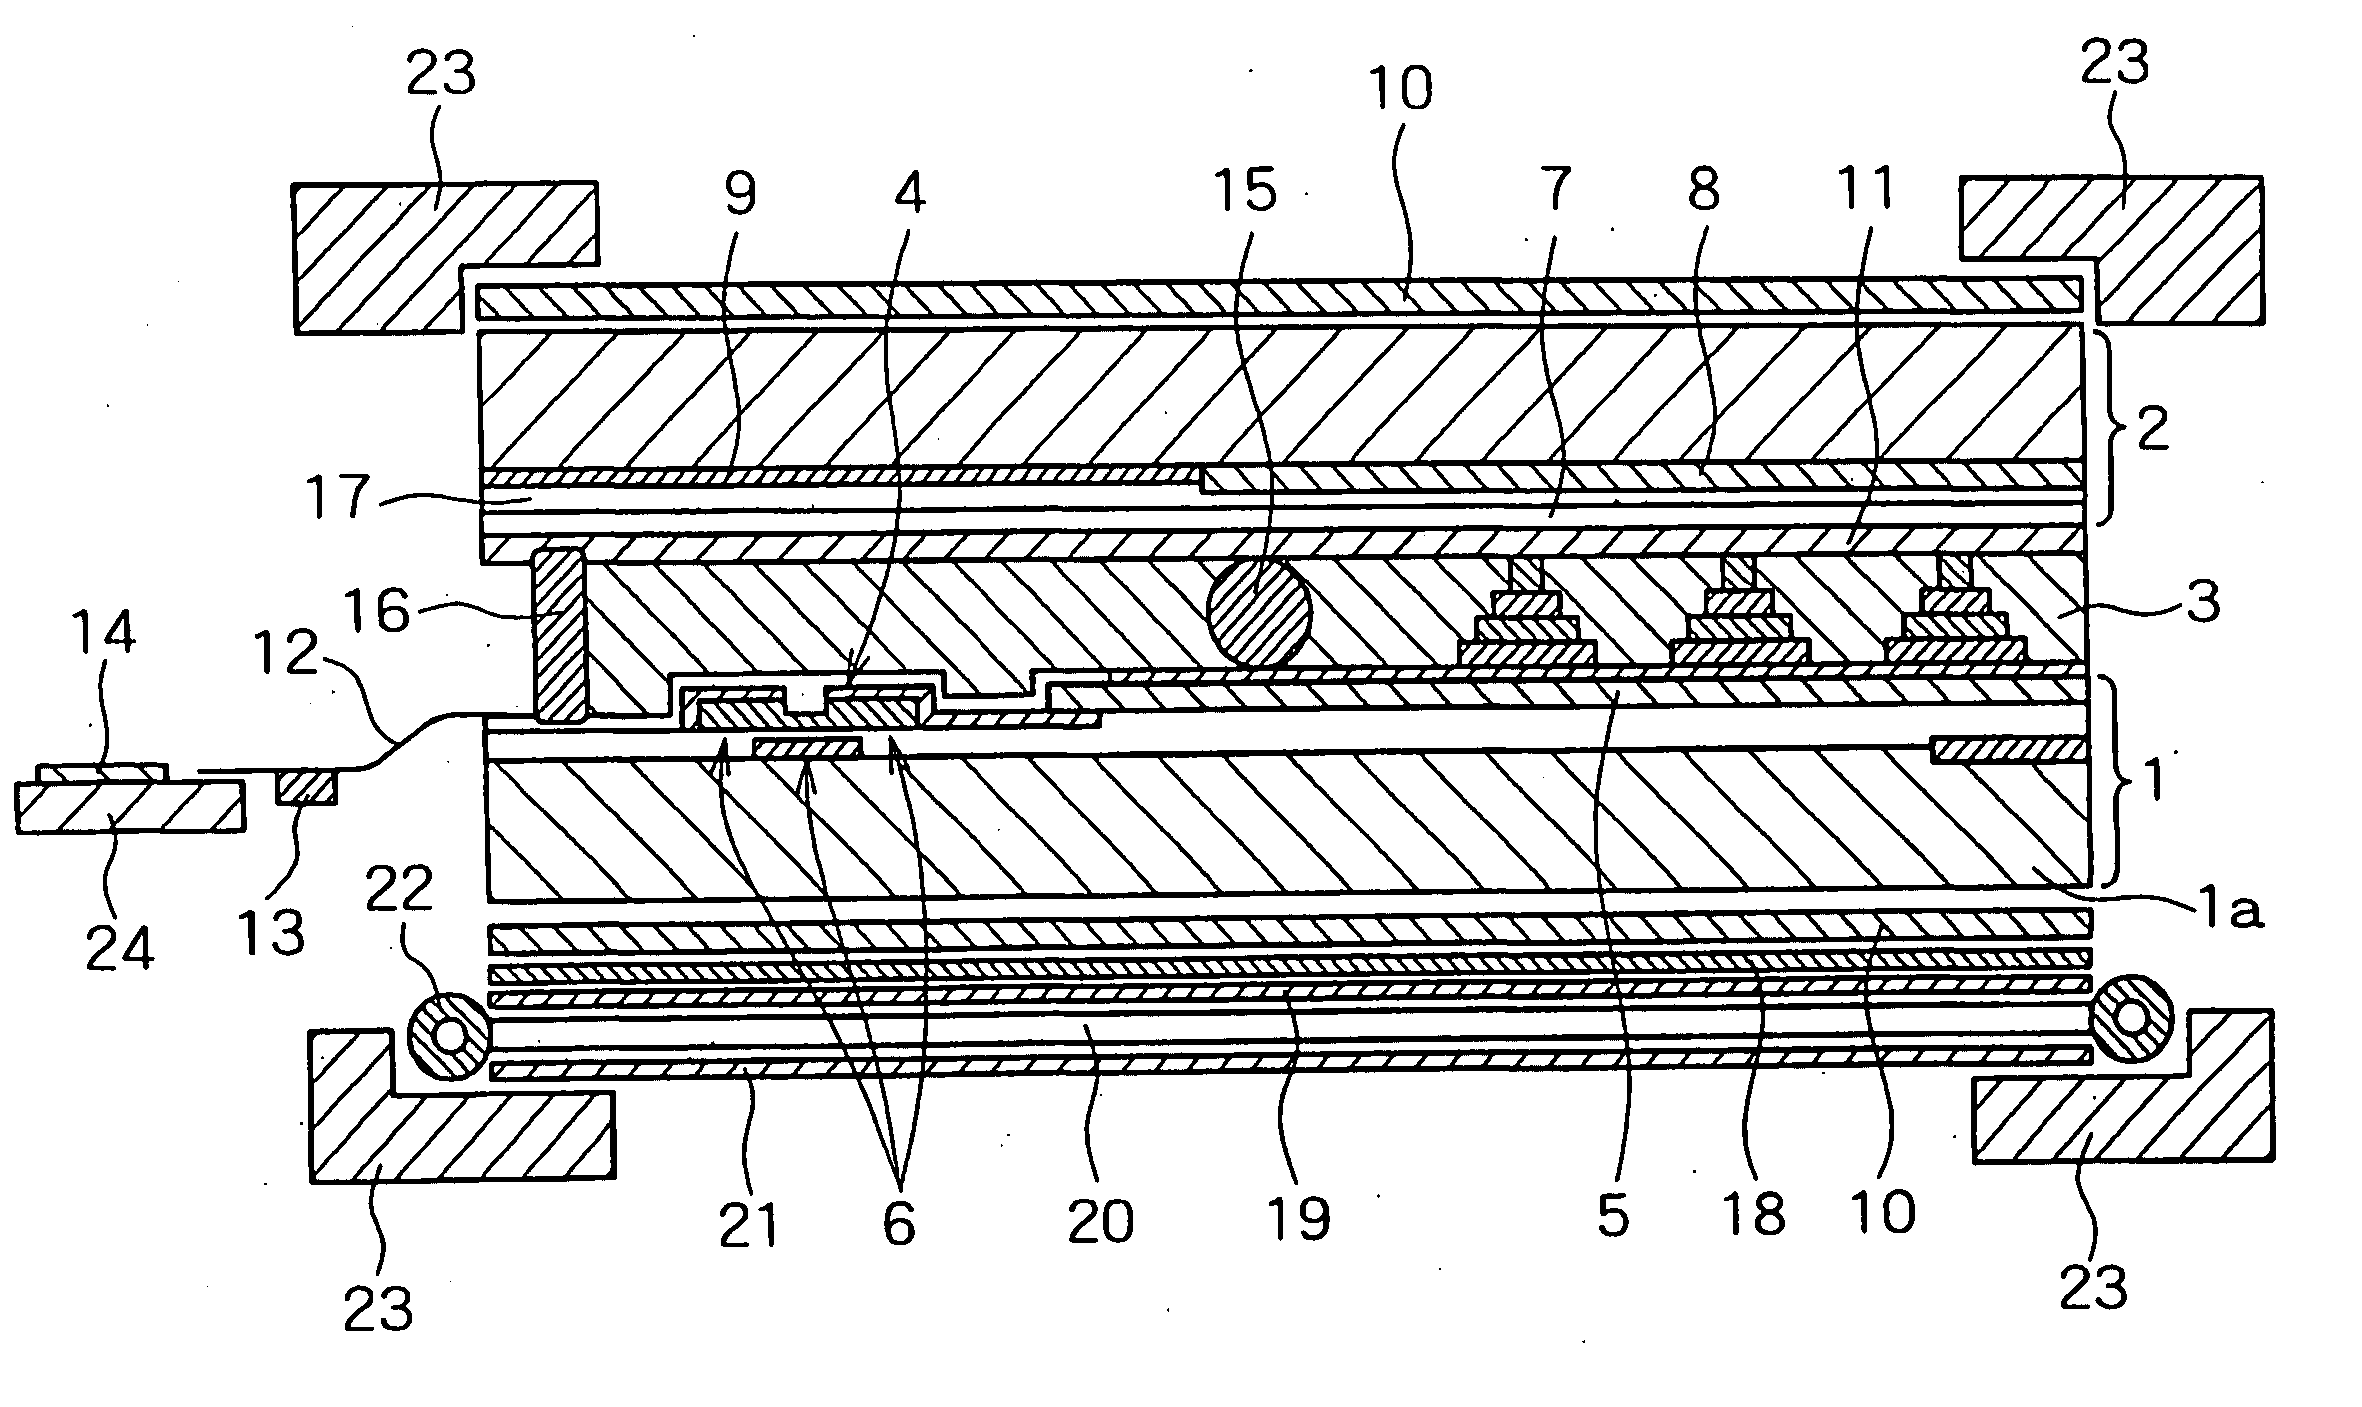 Electronic device, method of manufacture of the same, and sputtering target